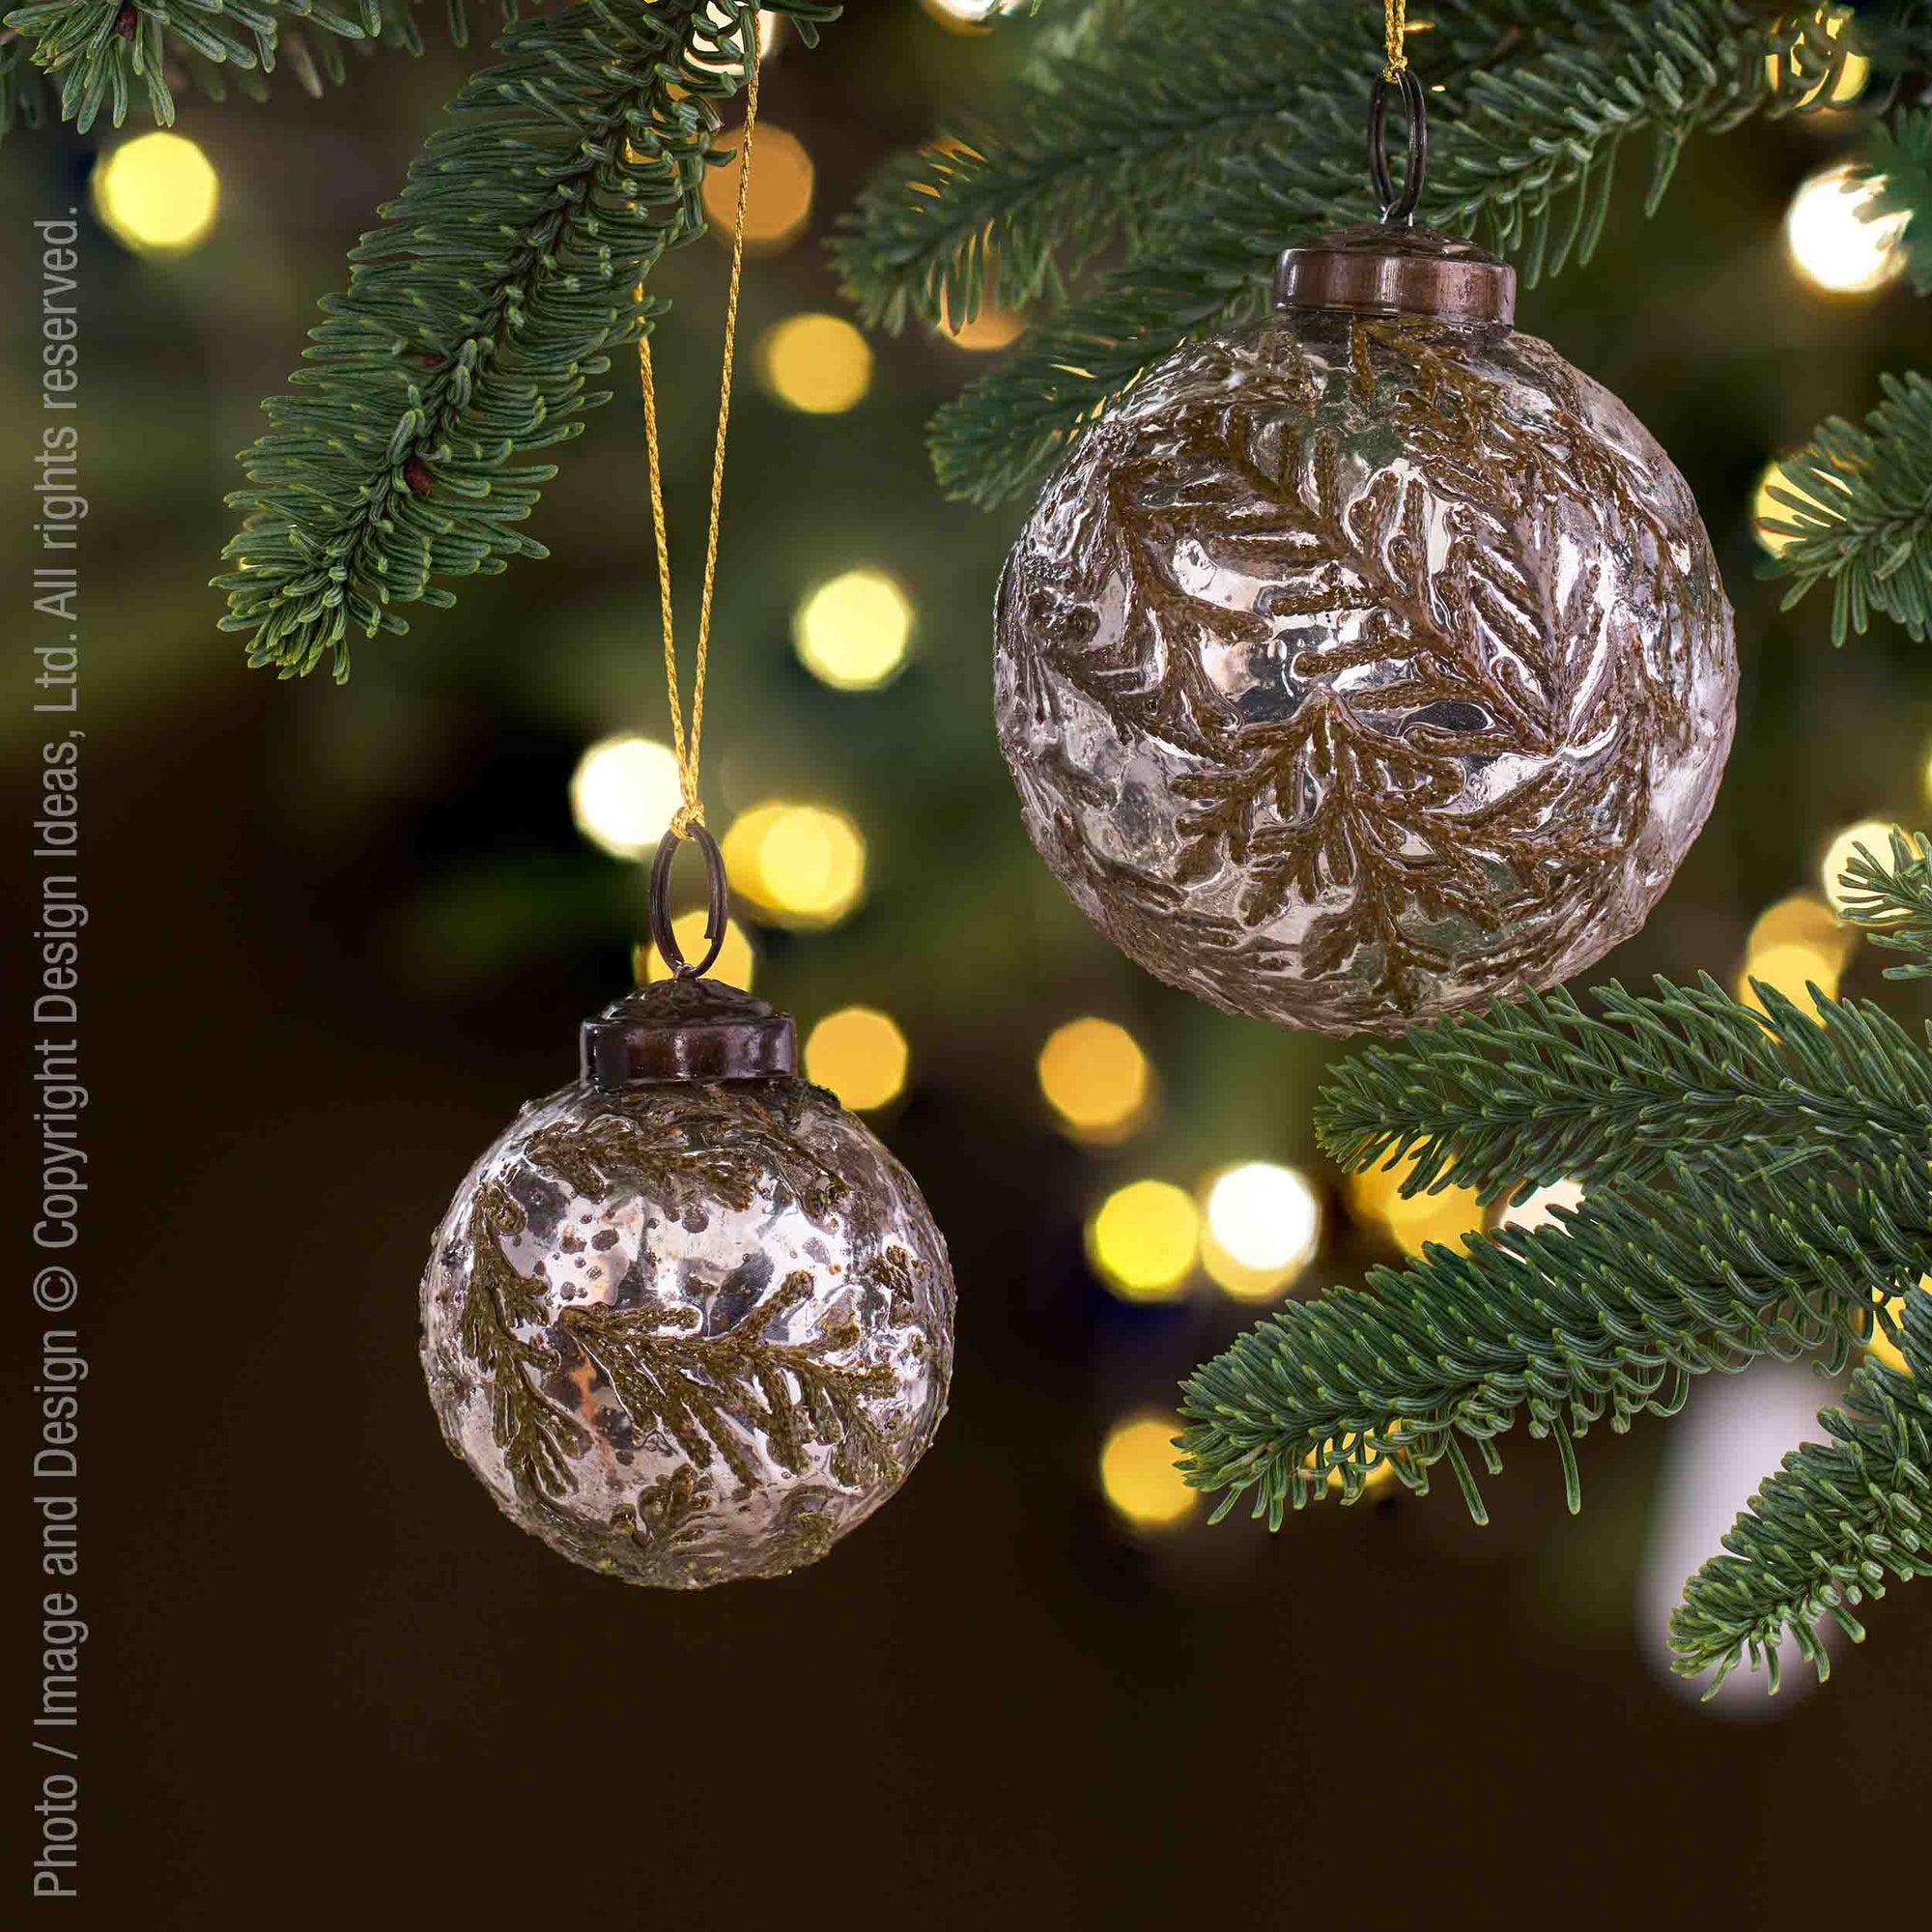 Balsam™ 3in Mouth Blown Glass Ornament - Silver | Image 2 | Premium Ornaments from the Balsam collection | made with Glass for long lasting use | texxture